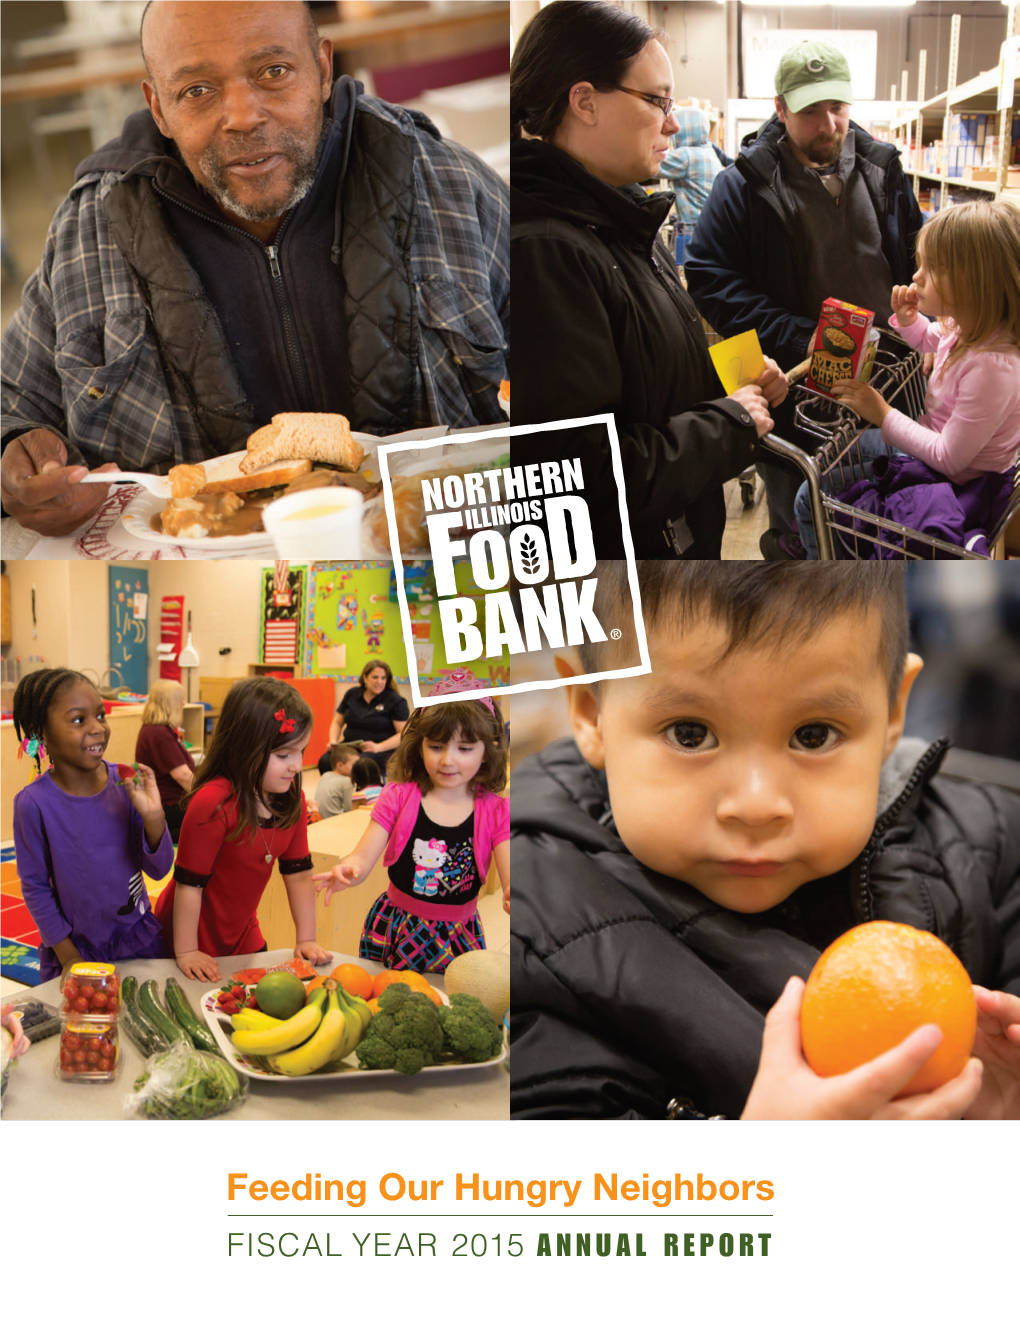 Feeding Our Hungry Neighbors FISCAL YEAR 2015 ANNUAL REPORT